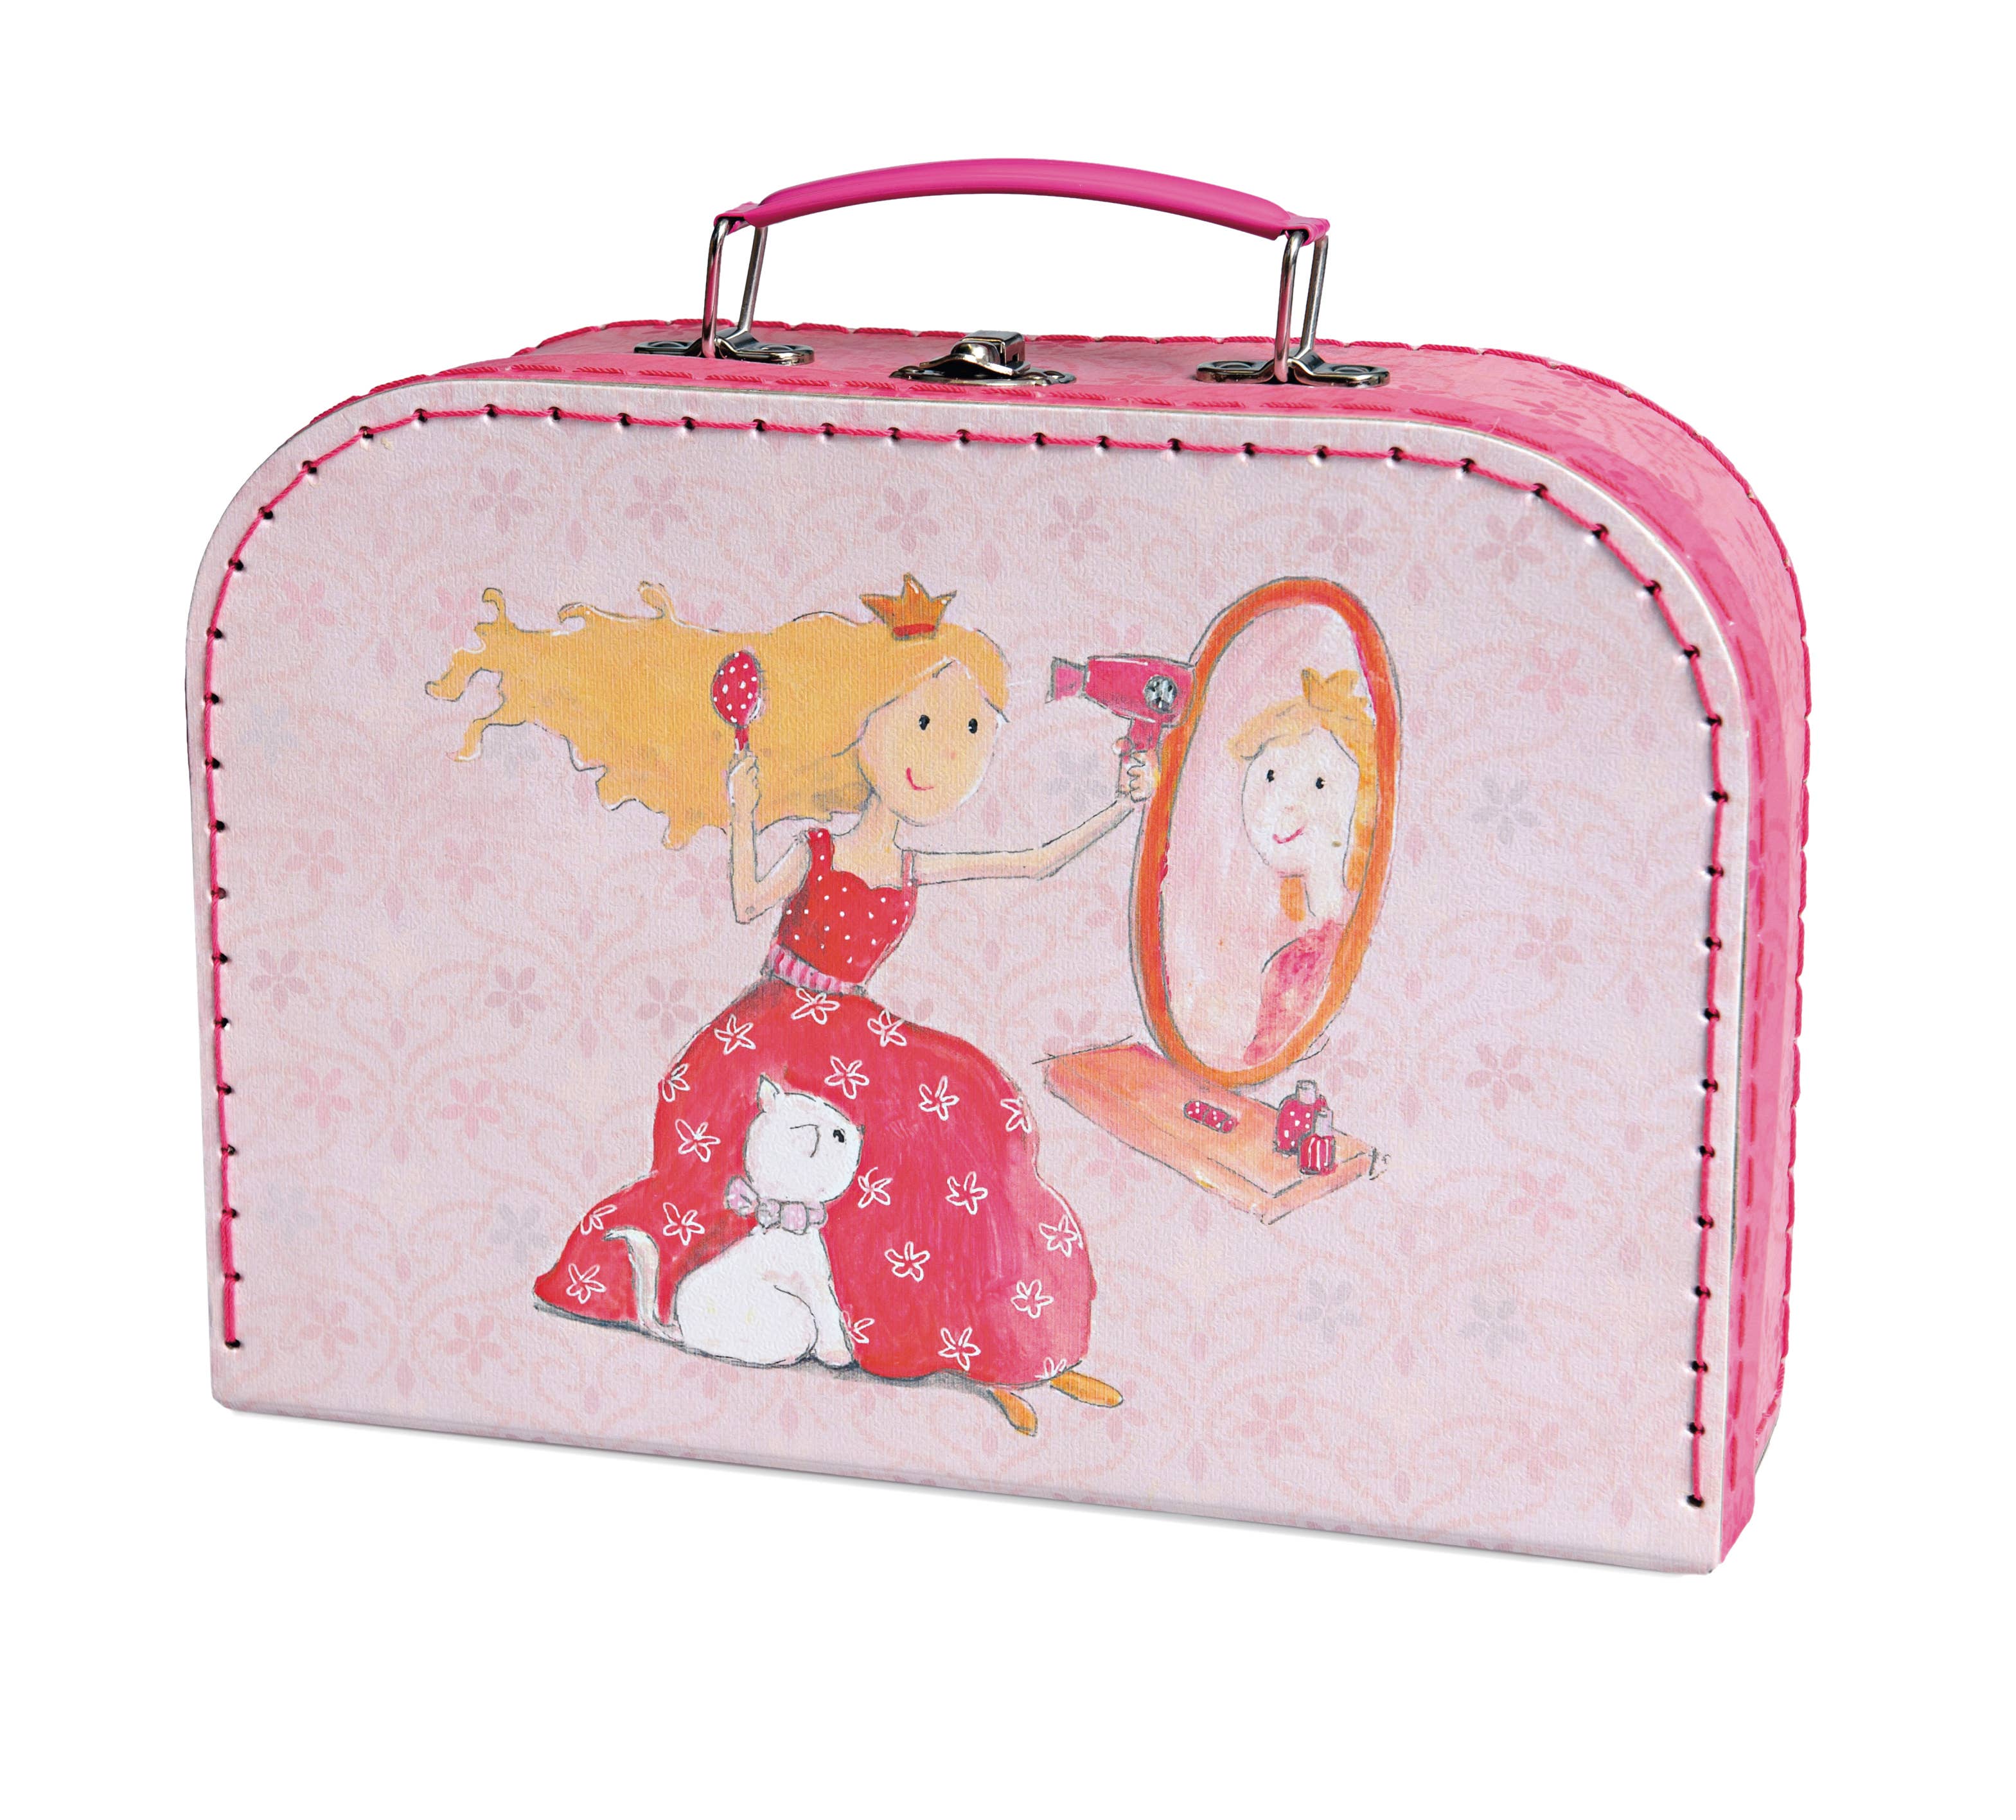 Pretend Play My First Make-Up Vanity Case - Twinkle Twinkle Little One